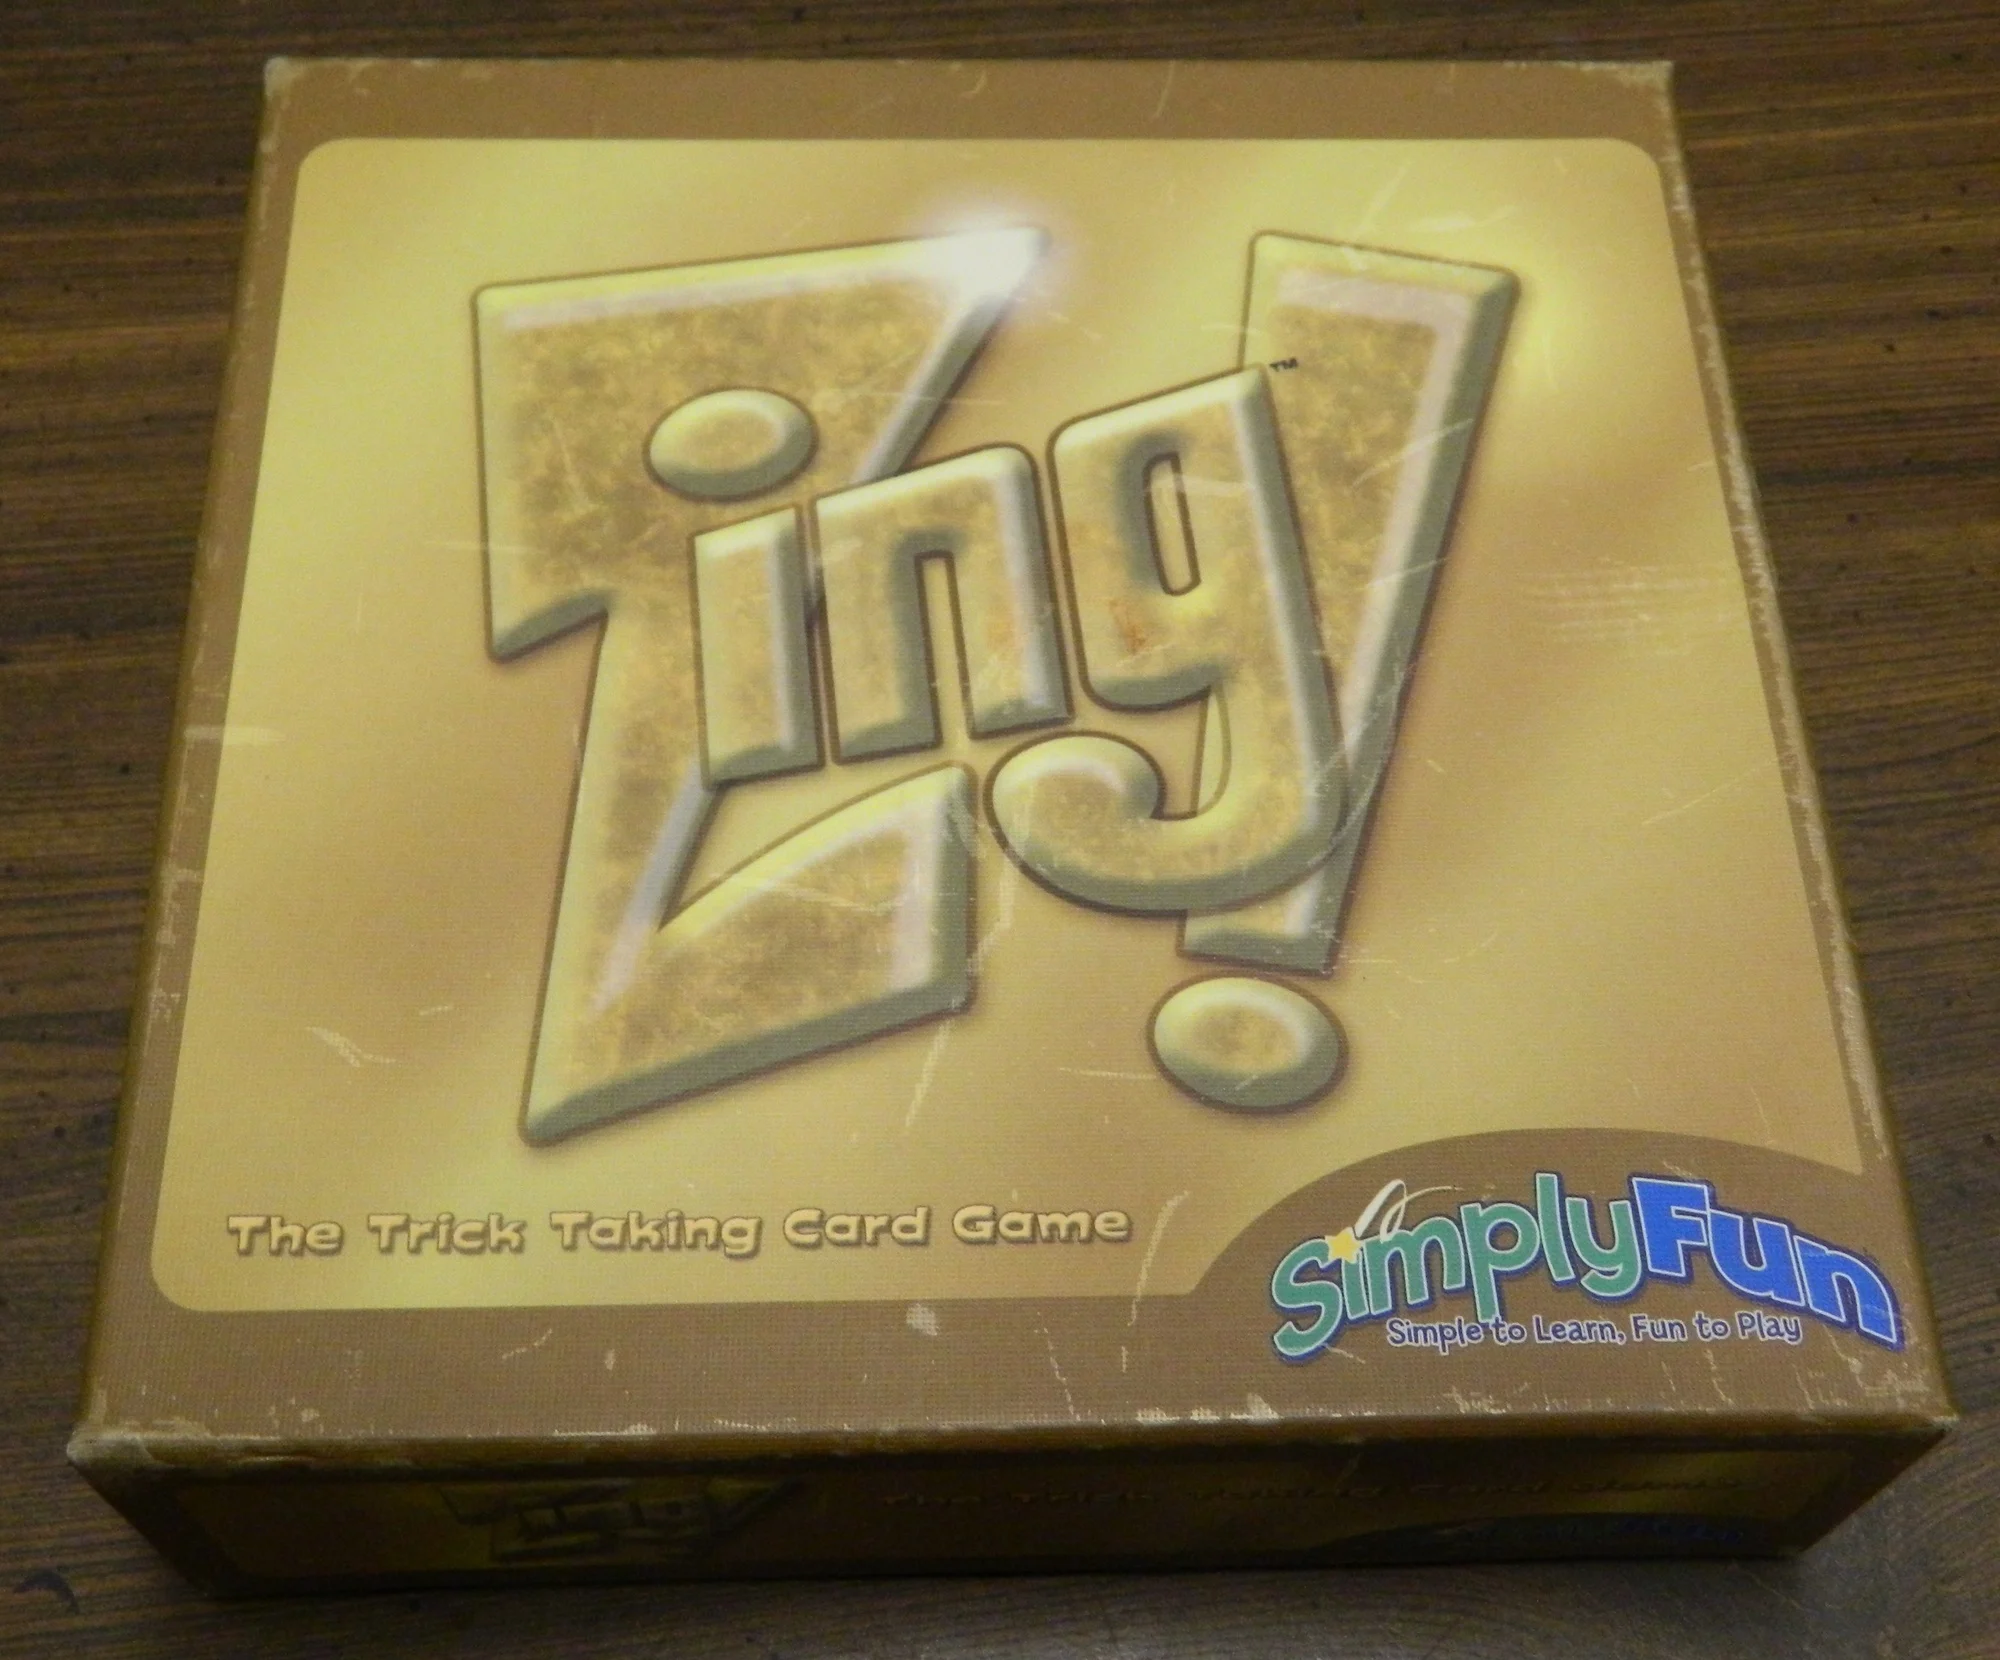 Box for Zing!